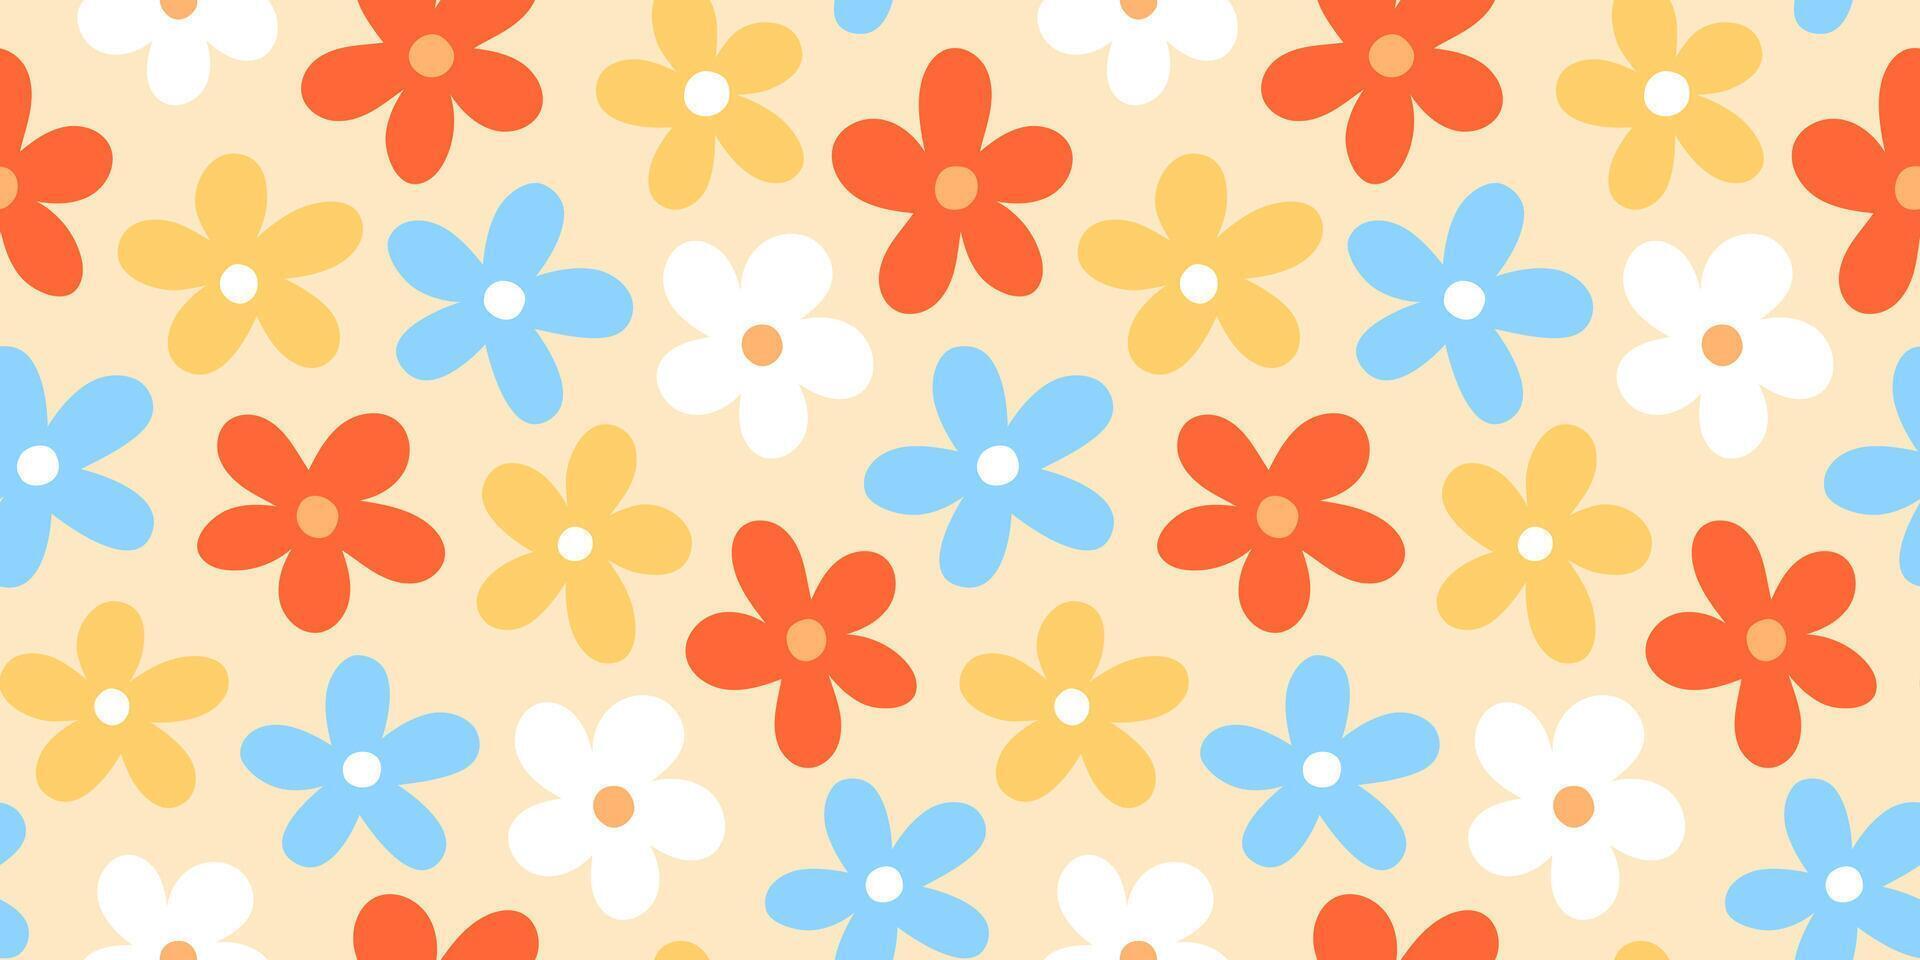 Abstract seamless pattern with vintage groovy daisy flowers. design y2k. 60s, 70s, 80s style vector